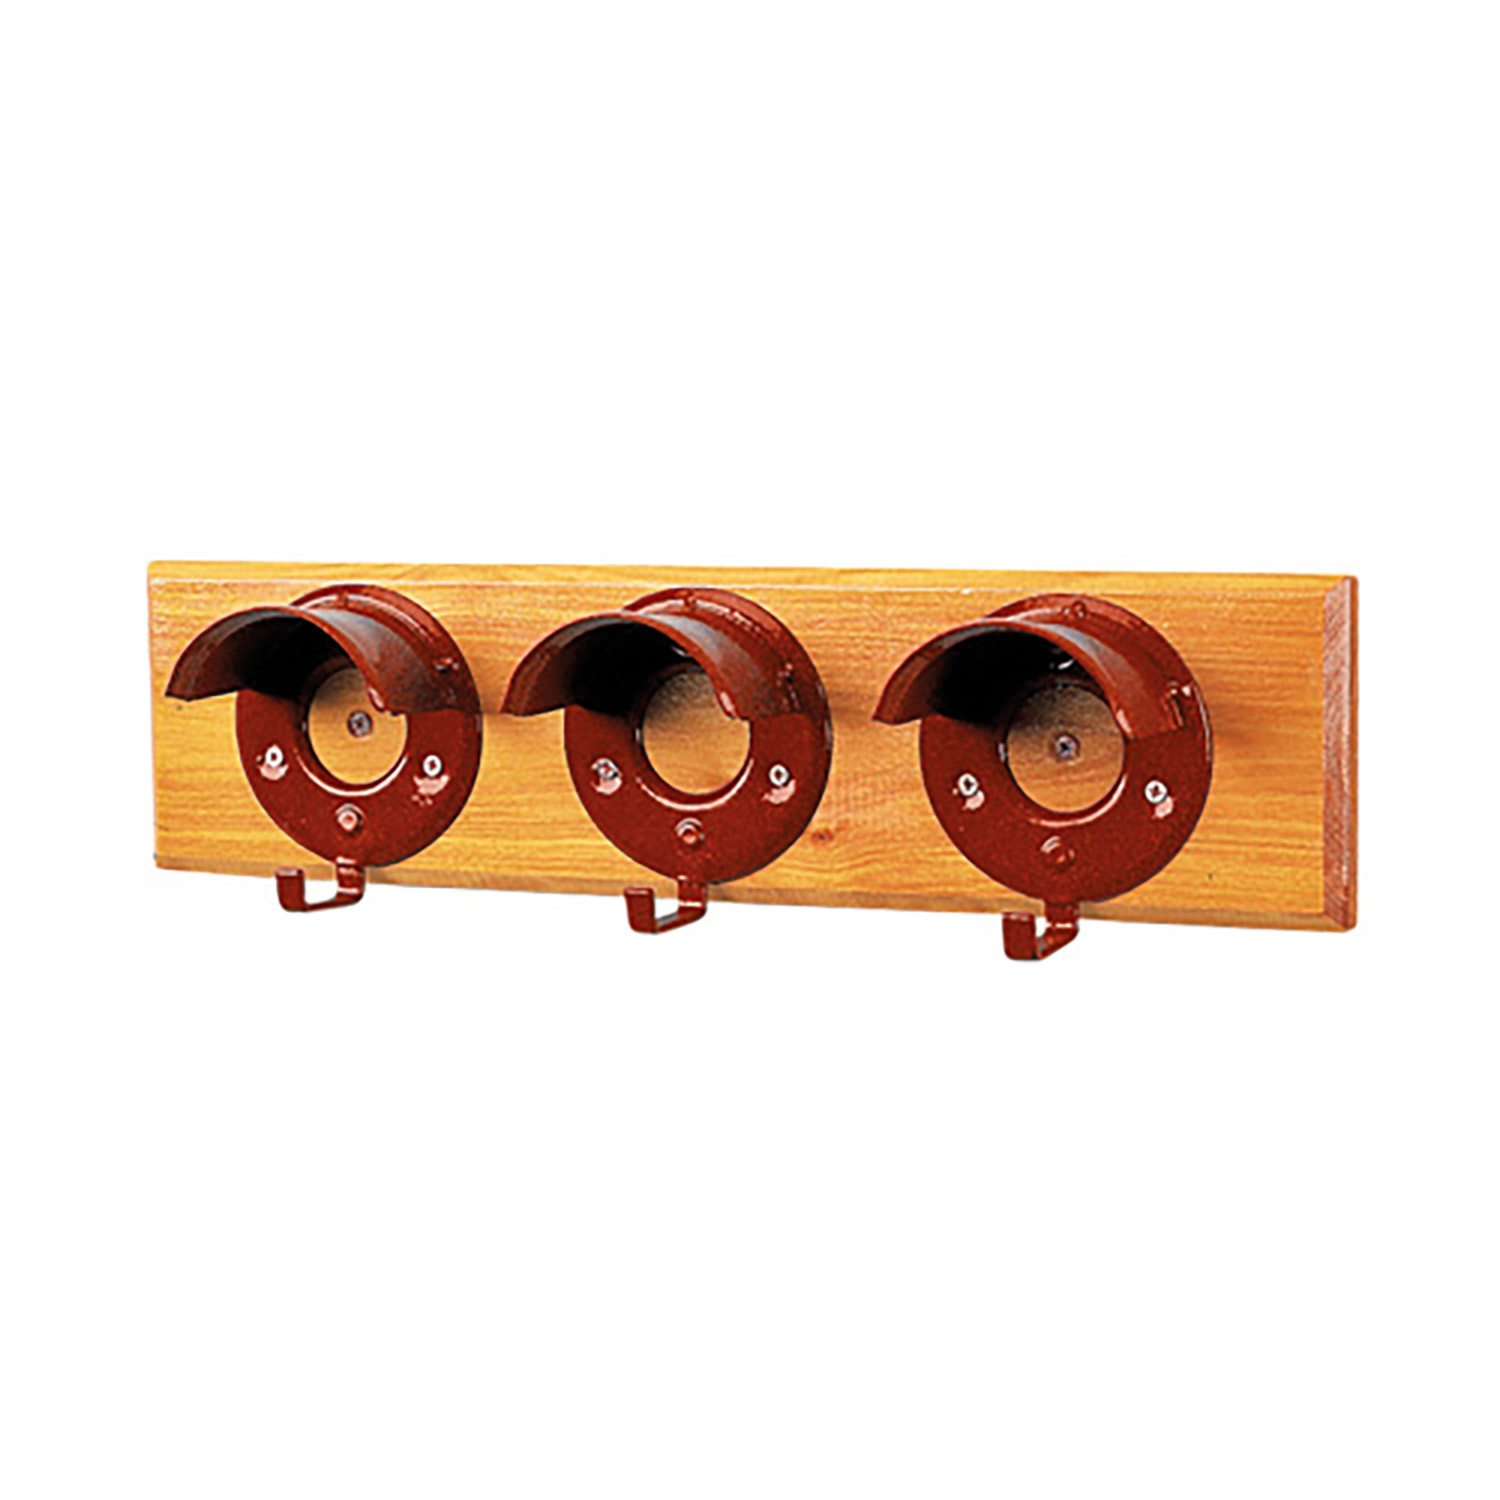 STUBBS BRIDLE RACK SET OF 3 ON BOARD S203 RED